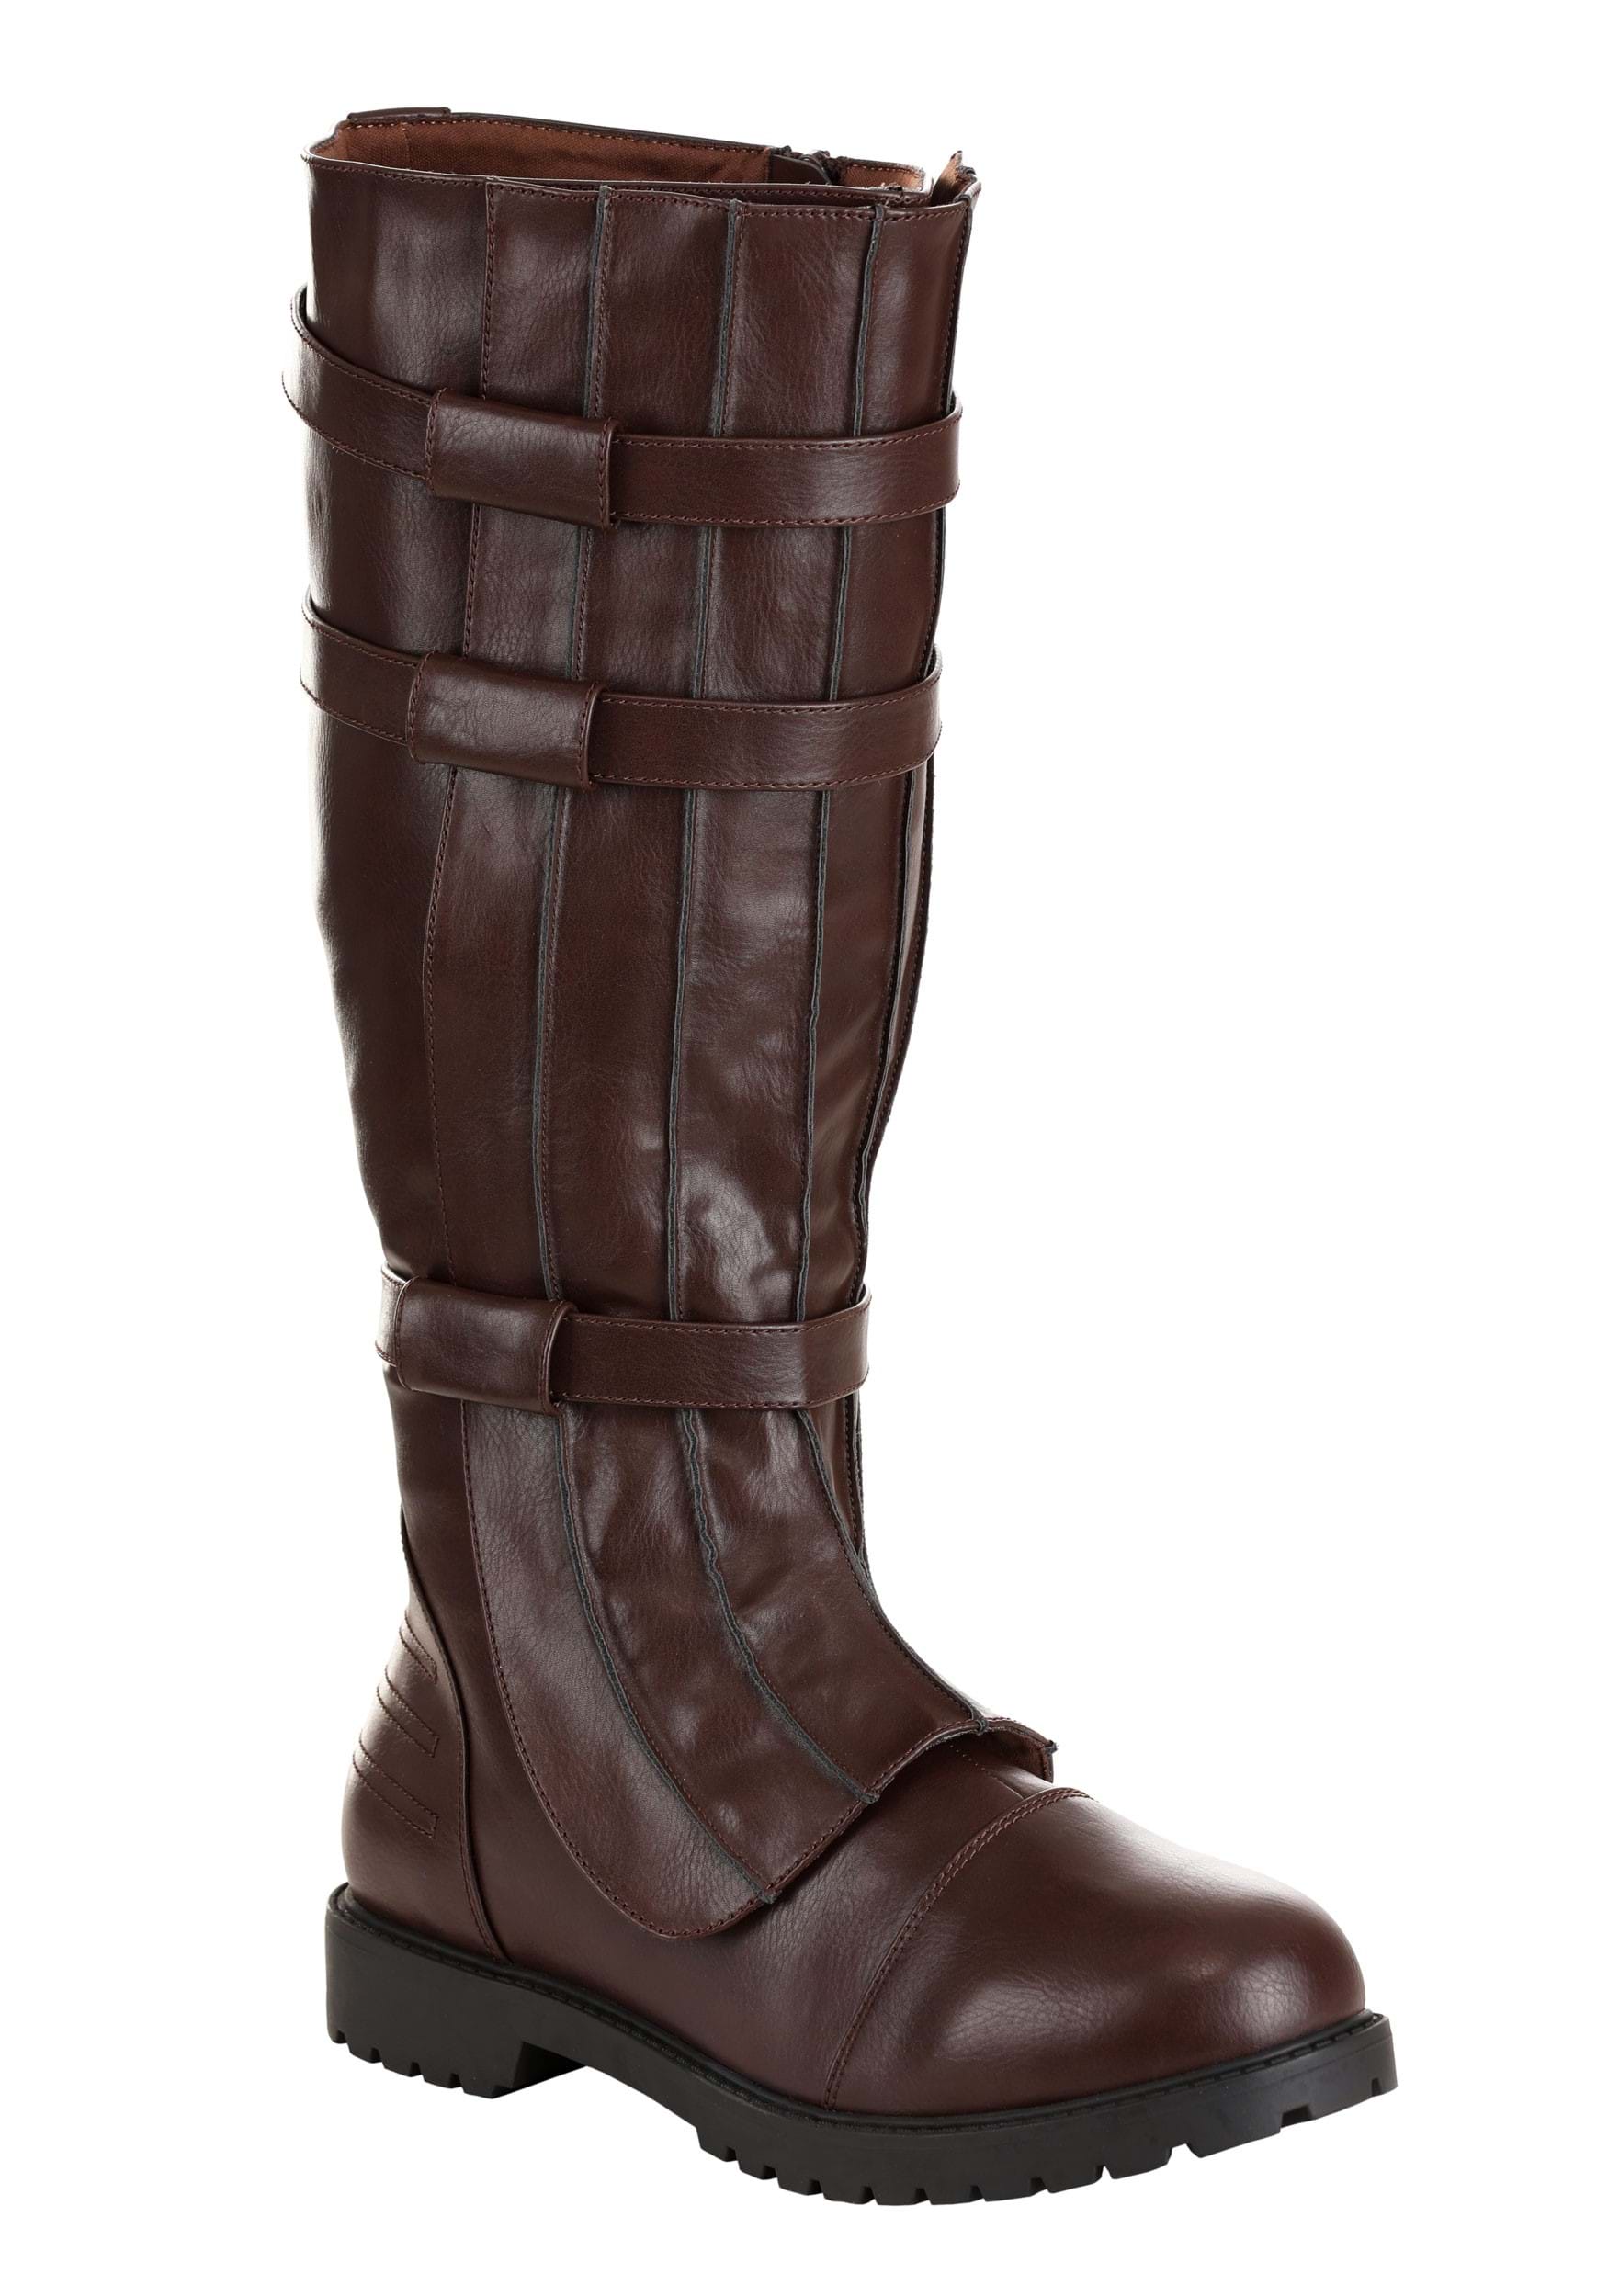 Image of Men's Brown Costume Boots ID FUN3409AD-13